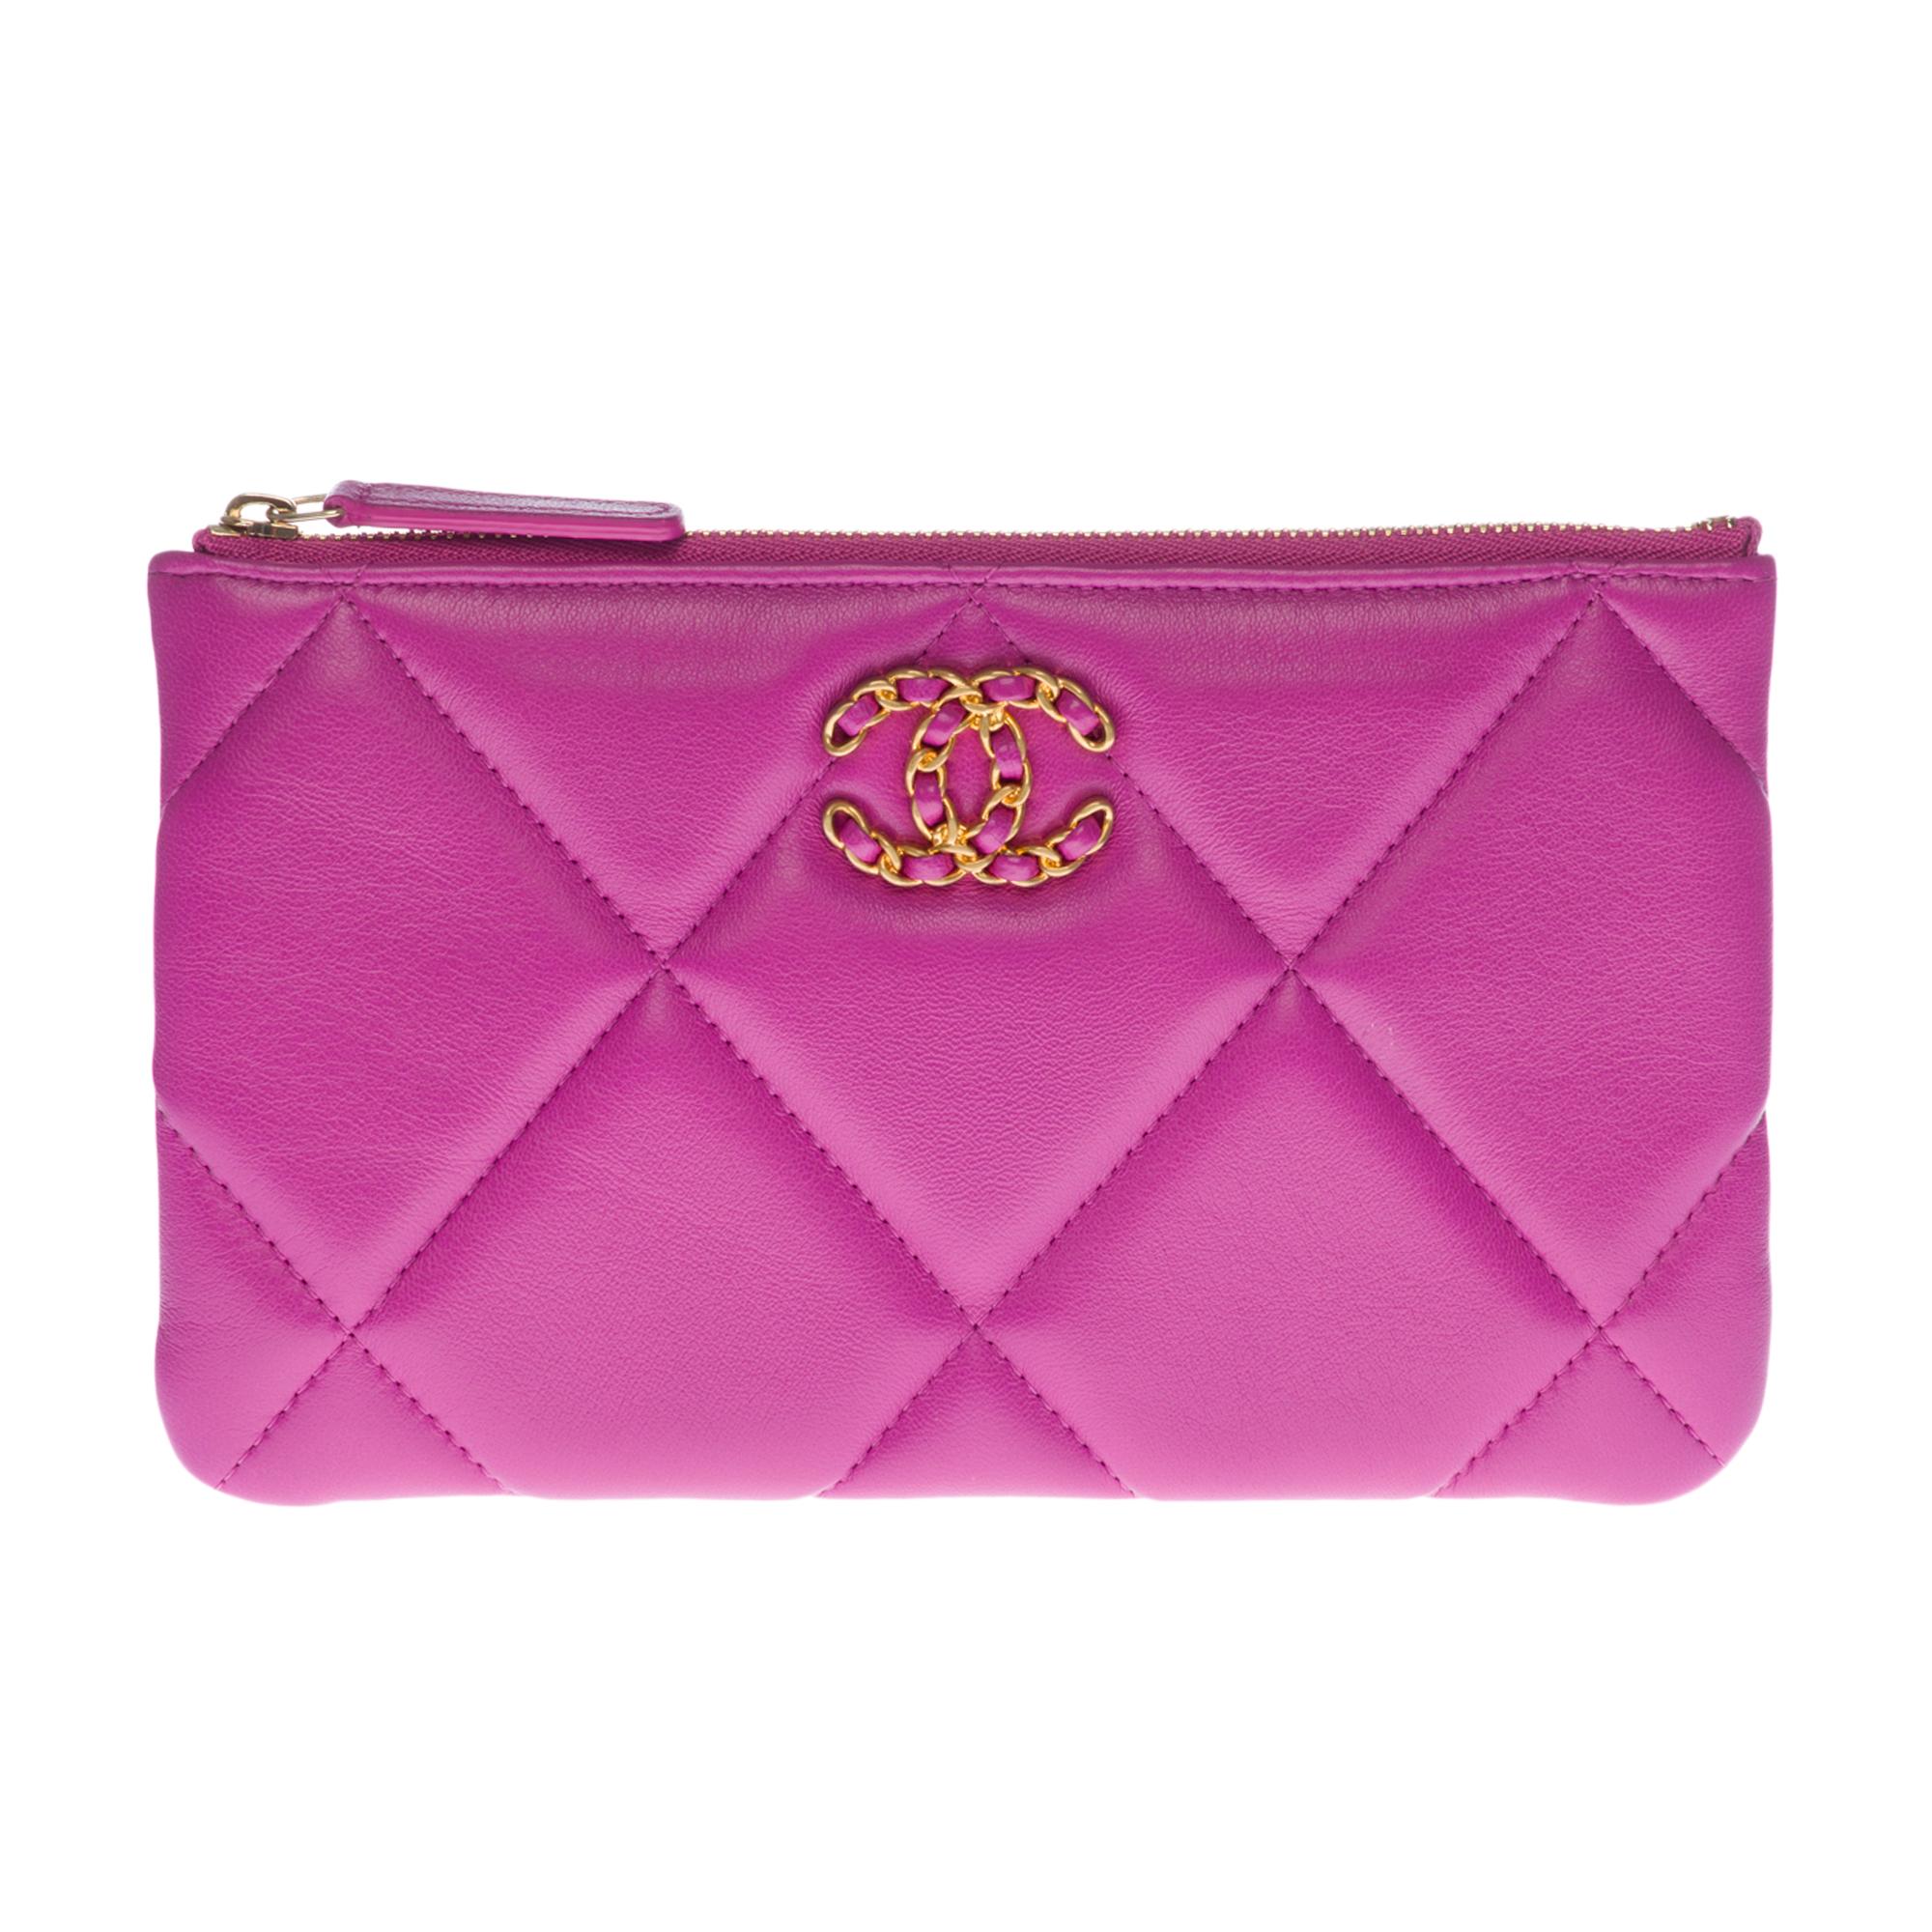 Gorgeous Pouch/Wallet Chanel 19 zipped in purple quilted lambskin, gold metal hardware
CC logo in gold metal interlaced with purple leather on the front
Top zipper closure
Purple canvas inner lining, one patch pocket, 3 card slots
Signature: